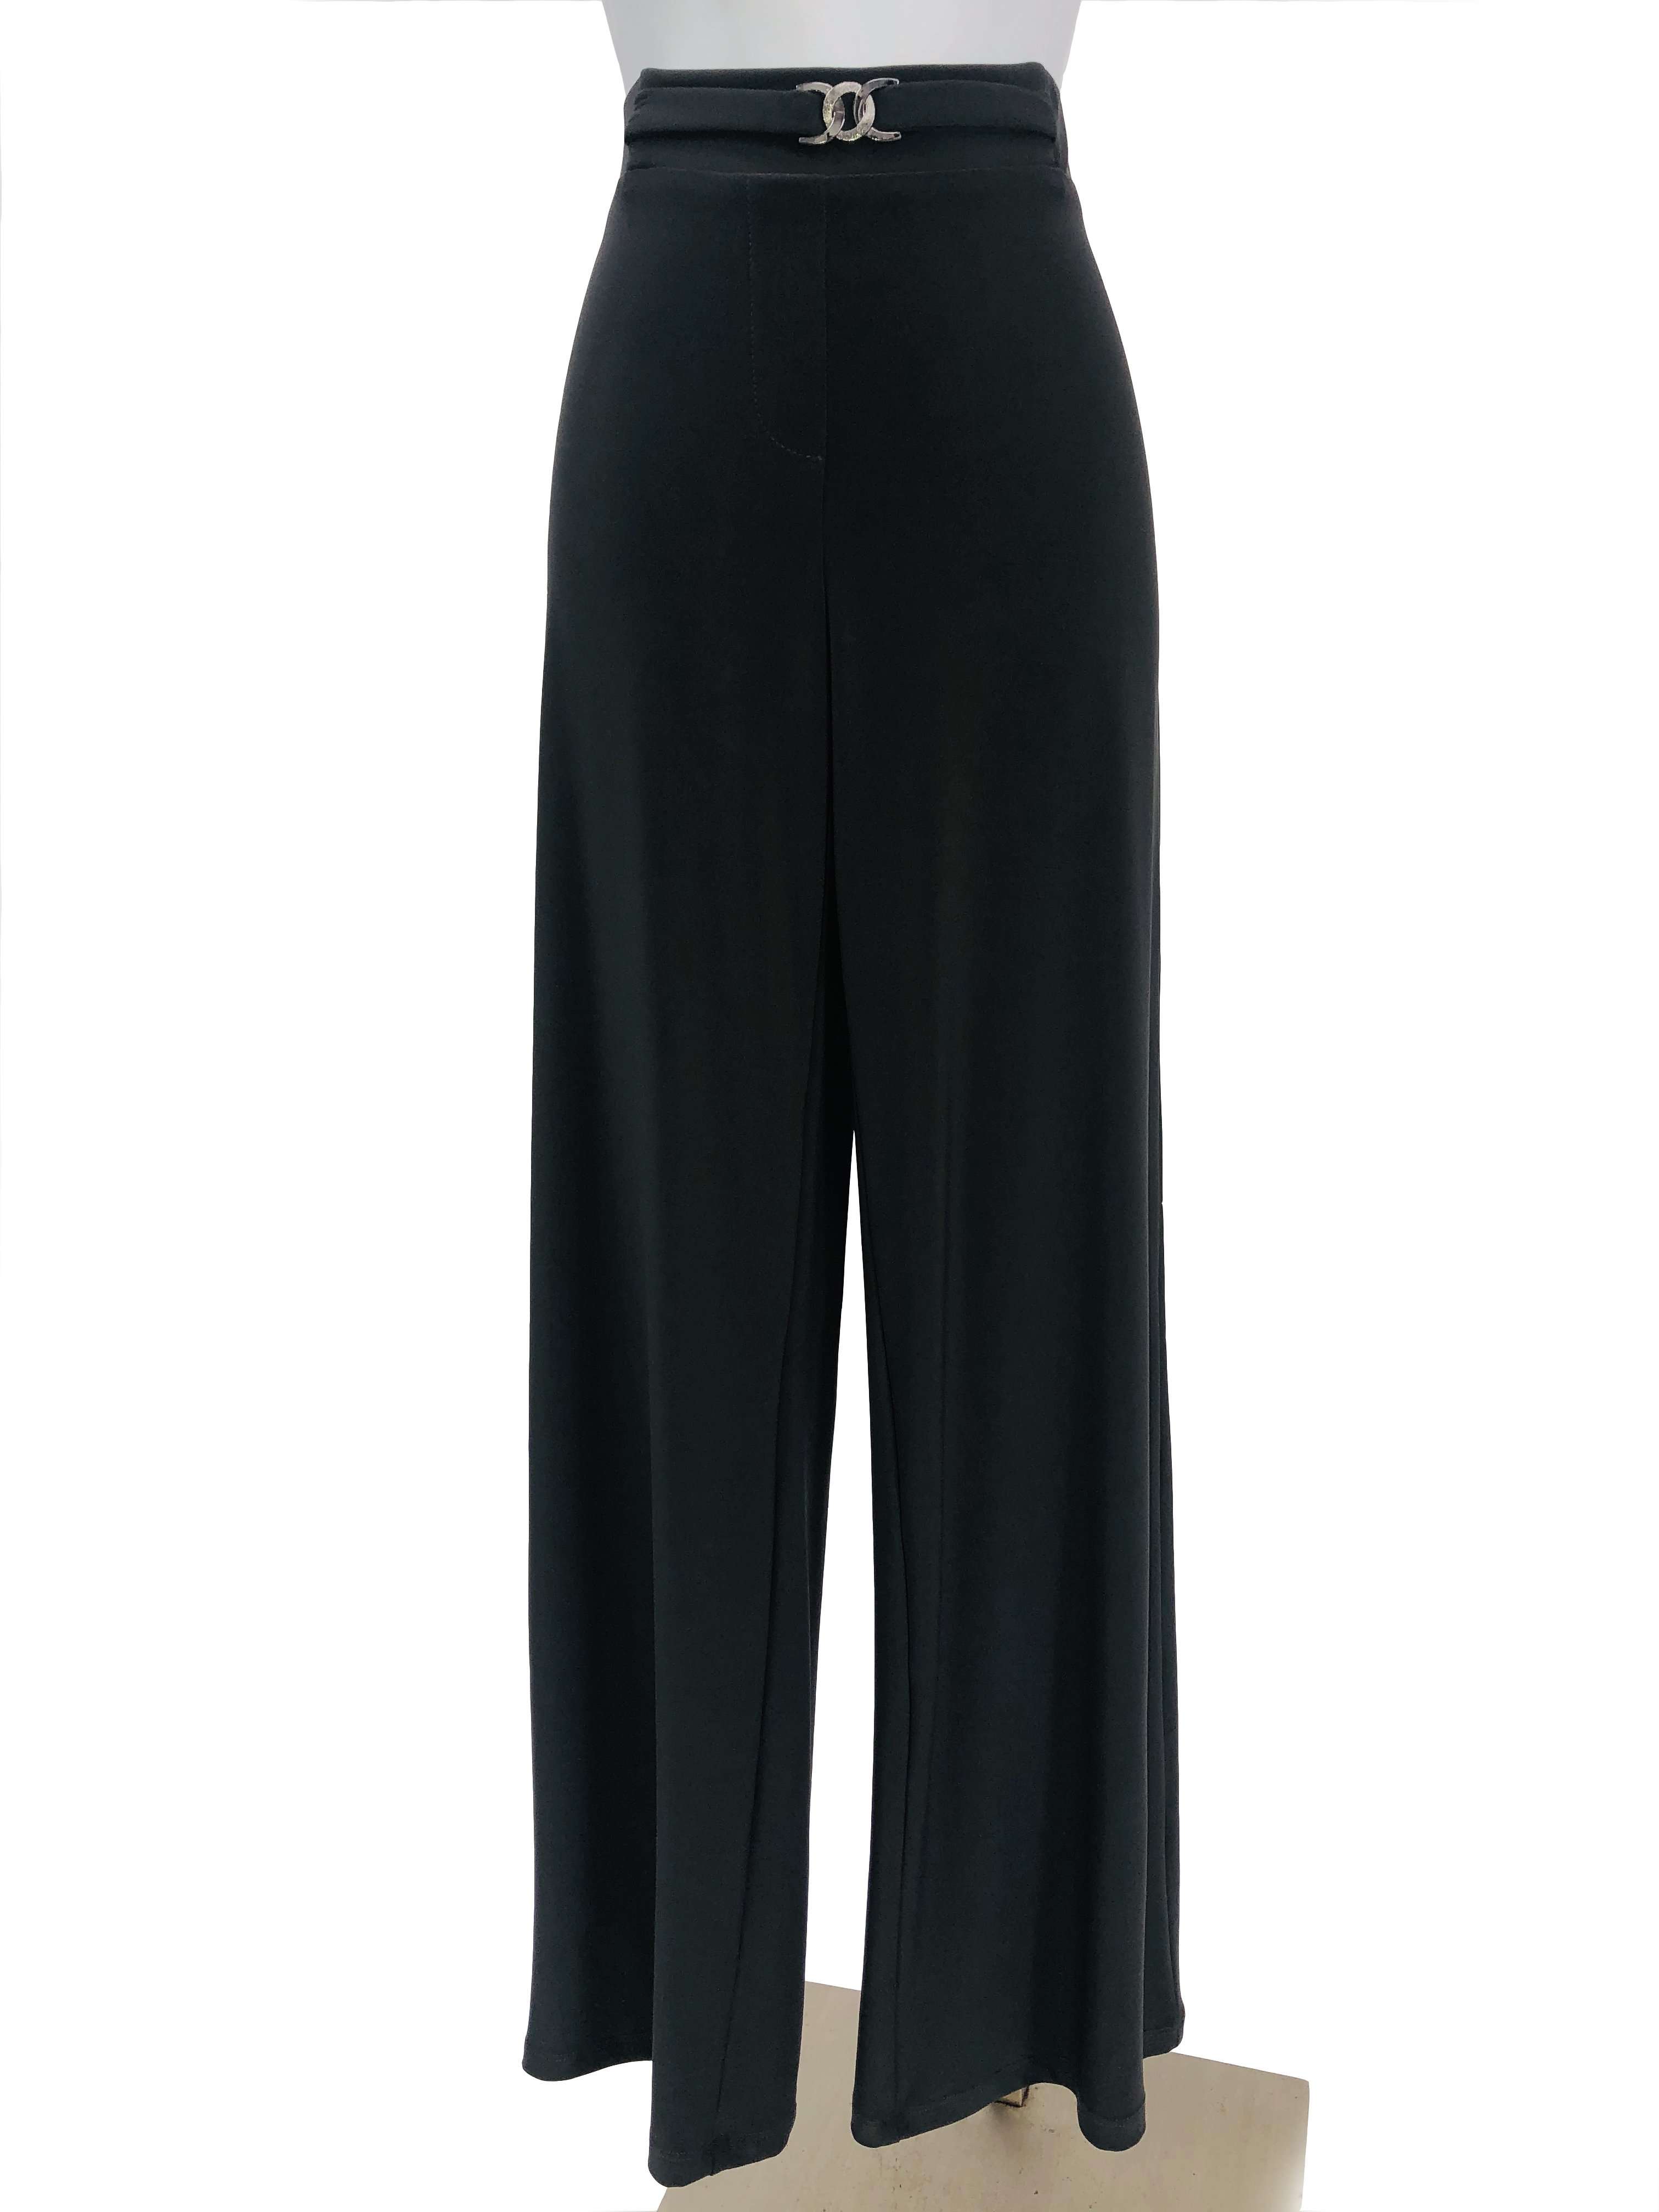 Women's Pants Charcoal Quality Stretch Fabric Our"Magic Pant " Best Seller Made in Canada - Yvonne Marie - Yvonne Marie